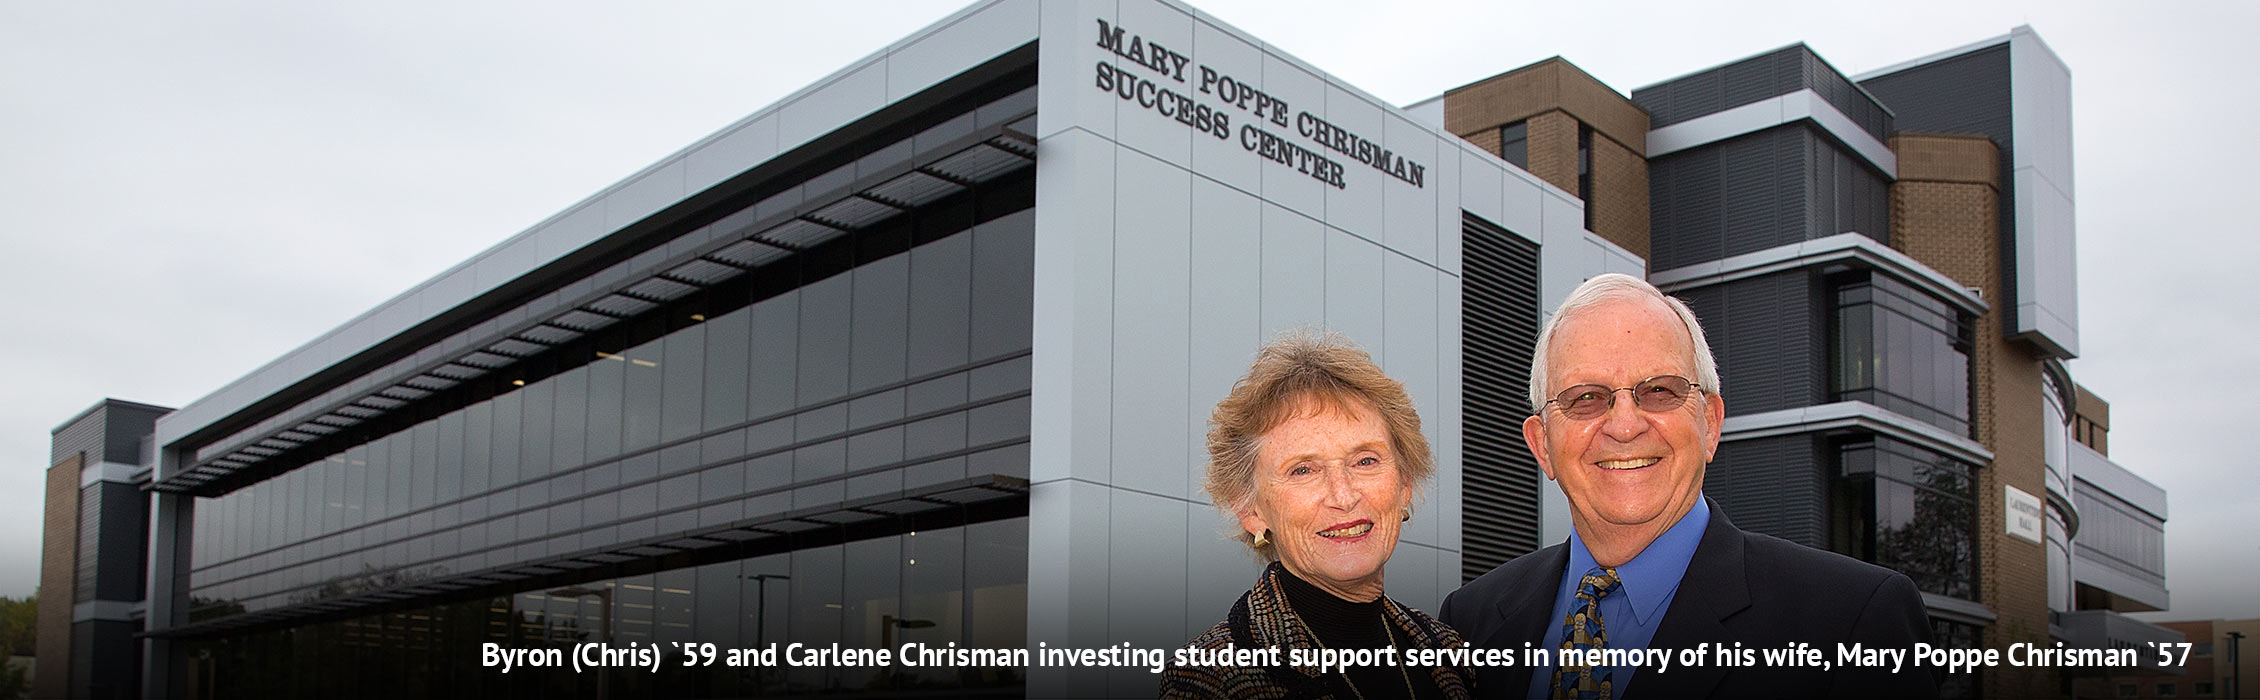 Chrisman Student Success Center and the donors who made it possible